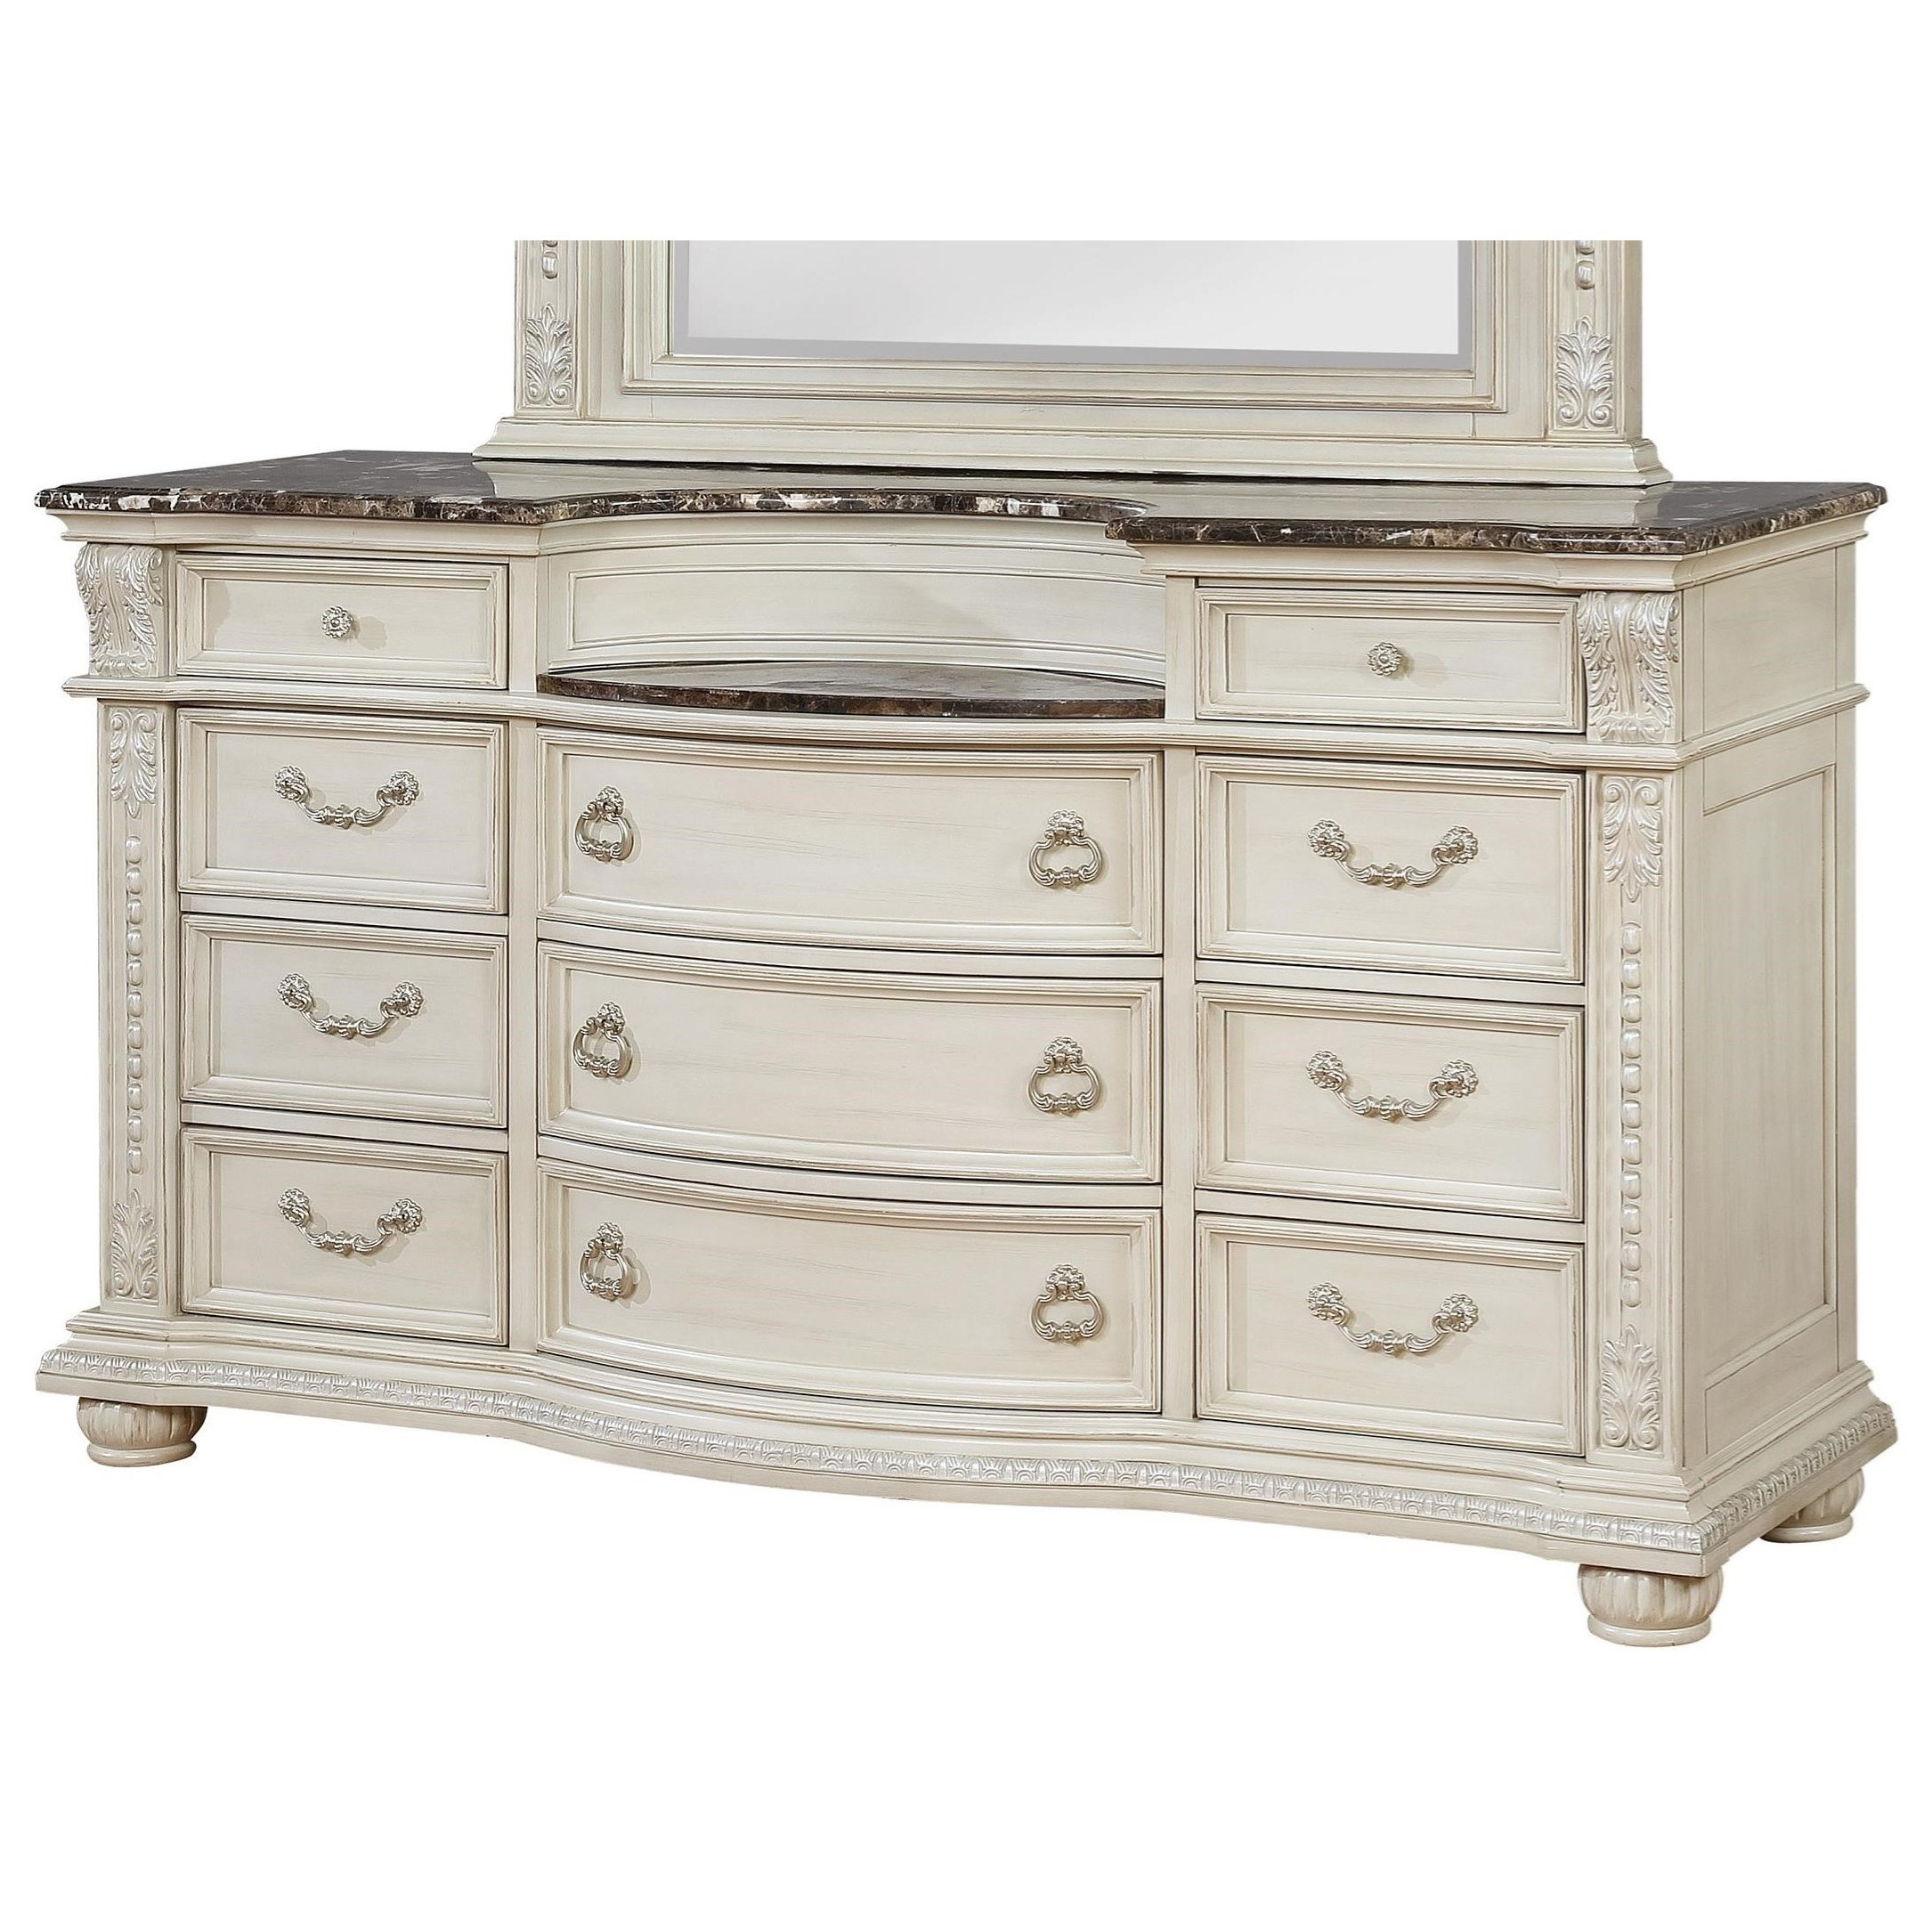 Stanley Antique White Marble Top Bedroom Set Product Furniture pertaining to size 2170 X 2170